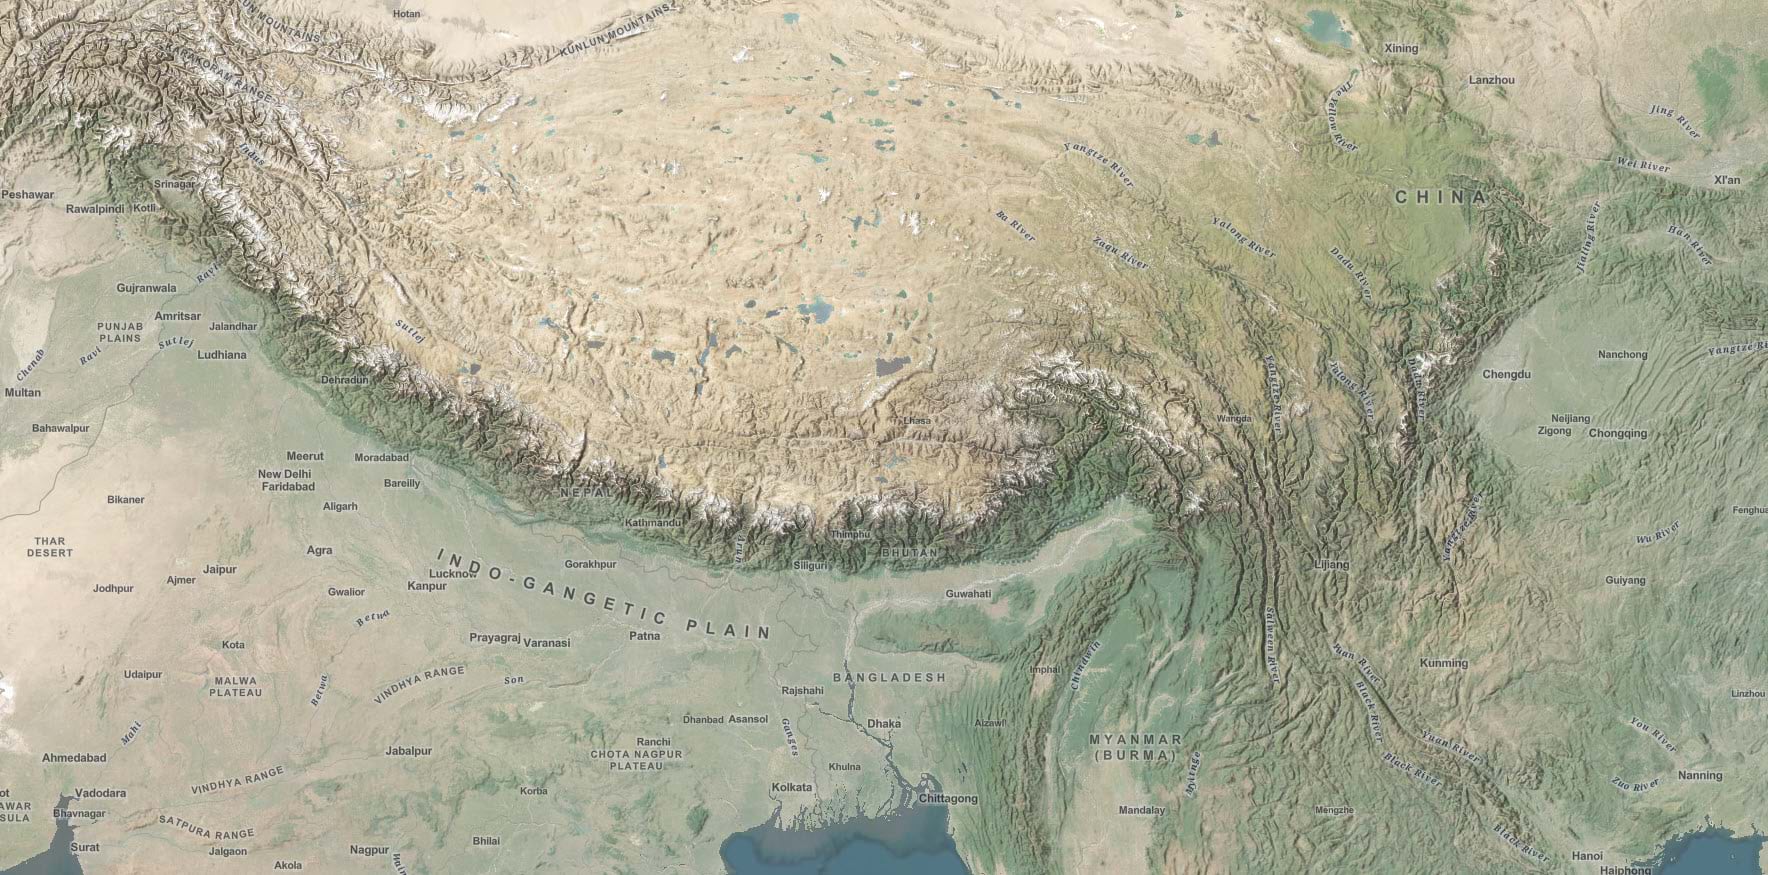 Blended basemaps showing the Himalaya Mountains and beyond.